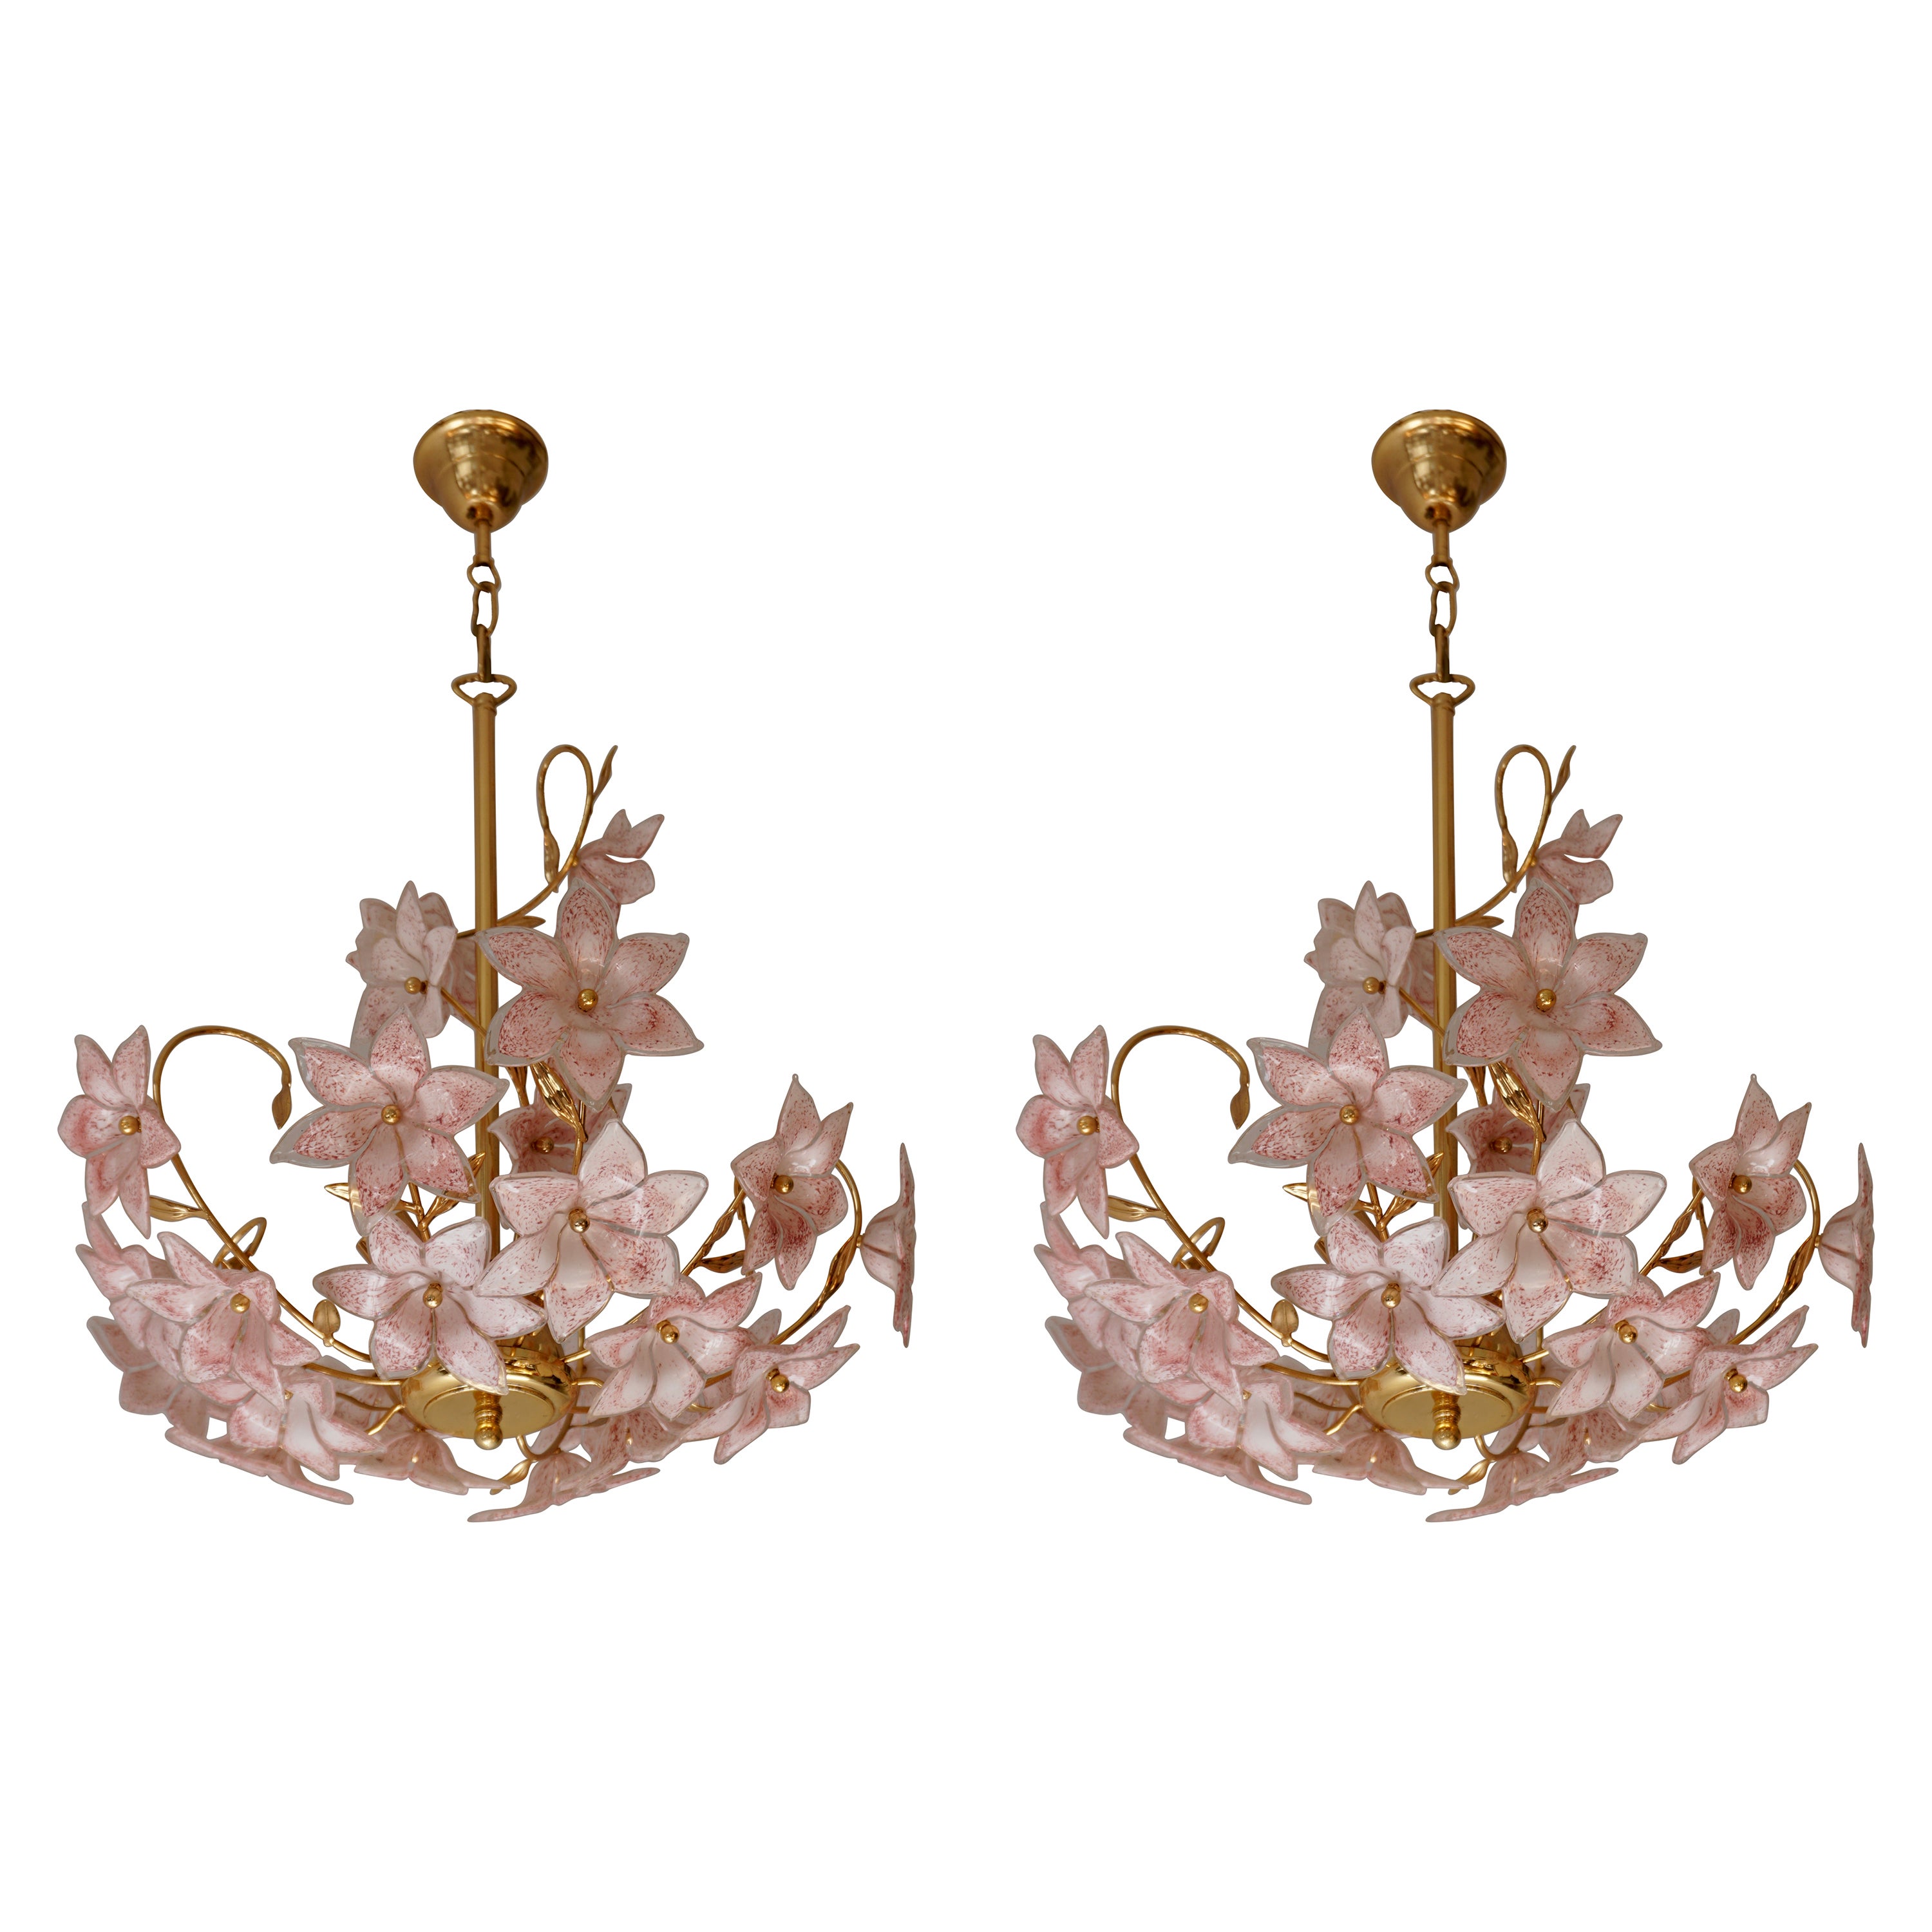 Set of 2 Italian Brass Chandeliers with White Pink Colored Murano Glass Flowers